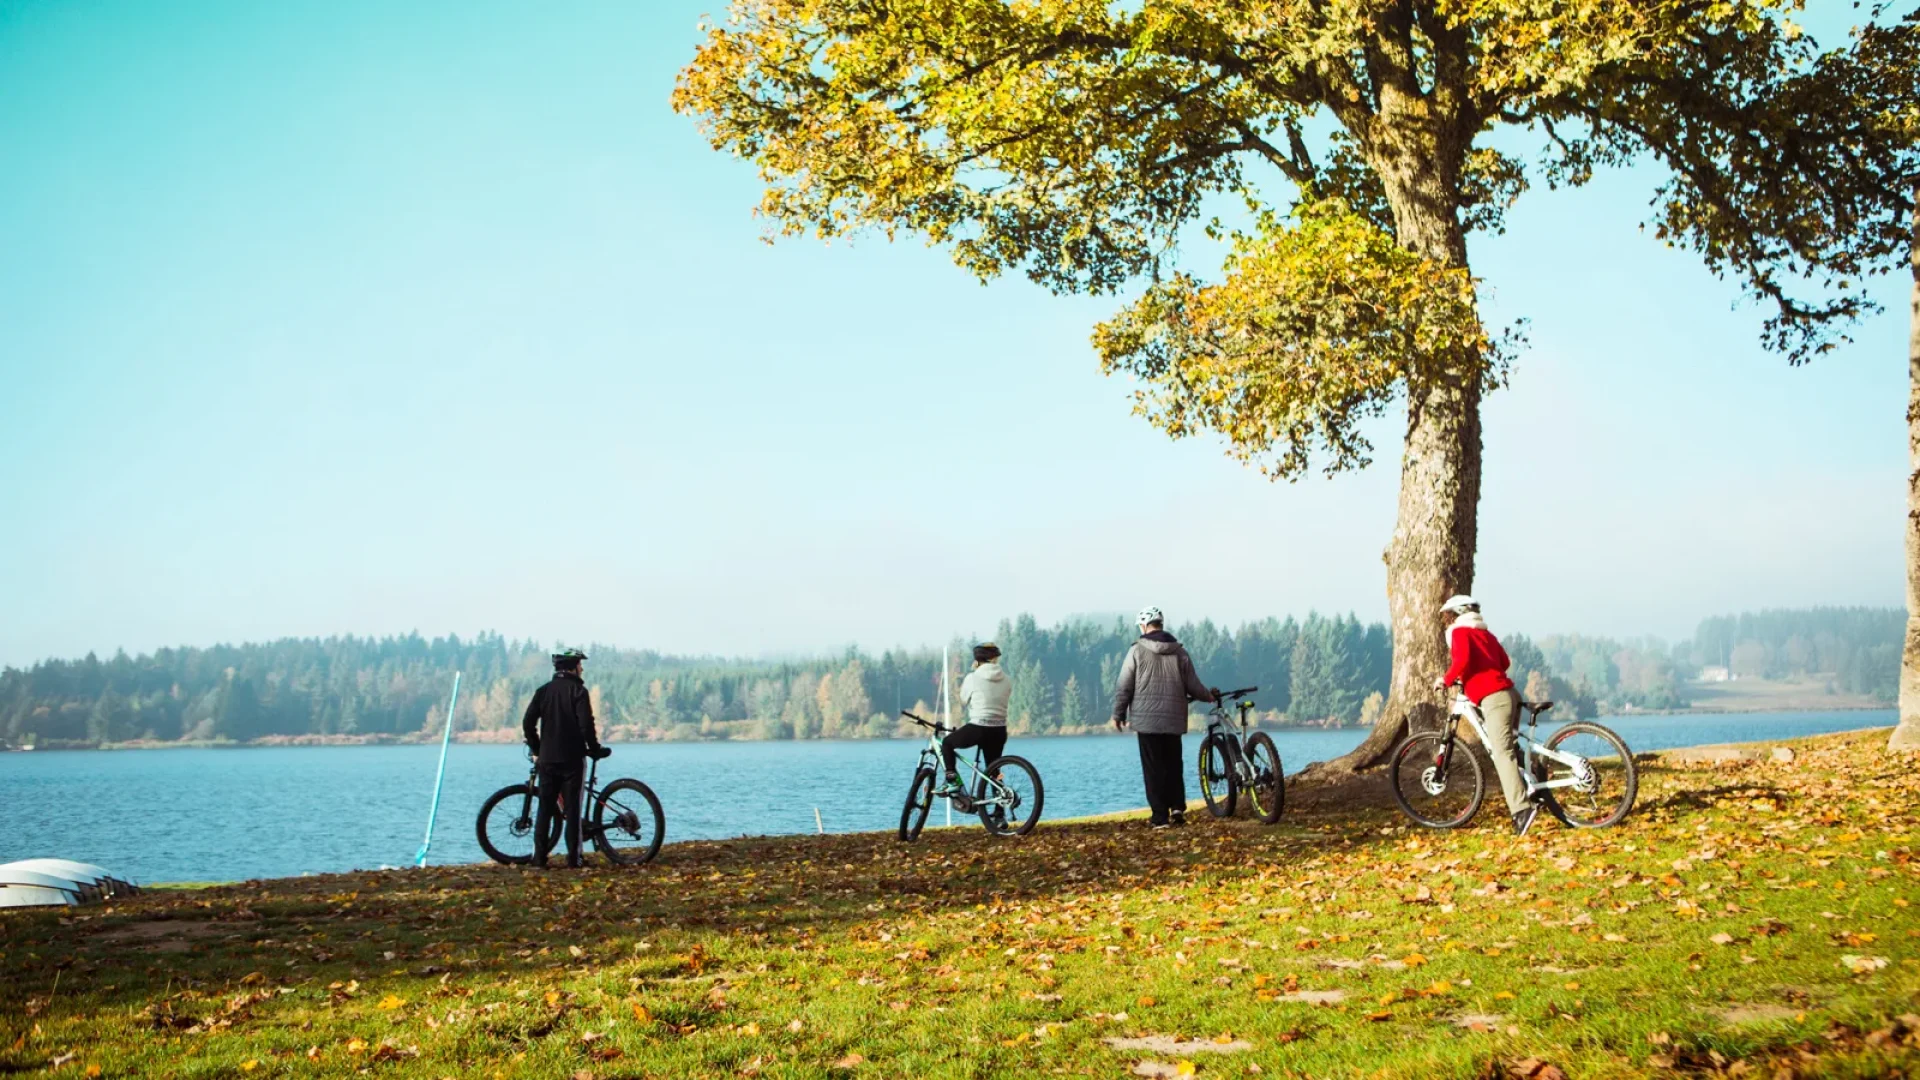 Group of cyclists near Devesset Lake in autumn